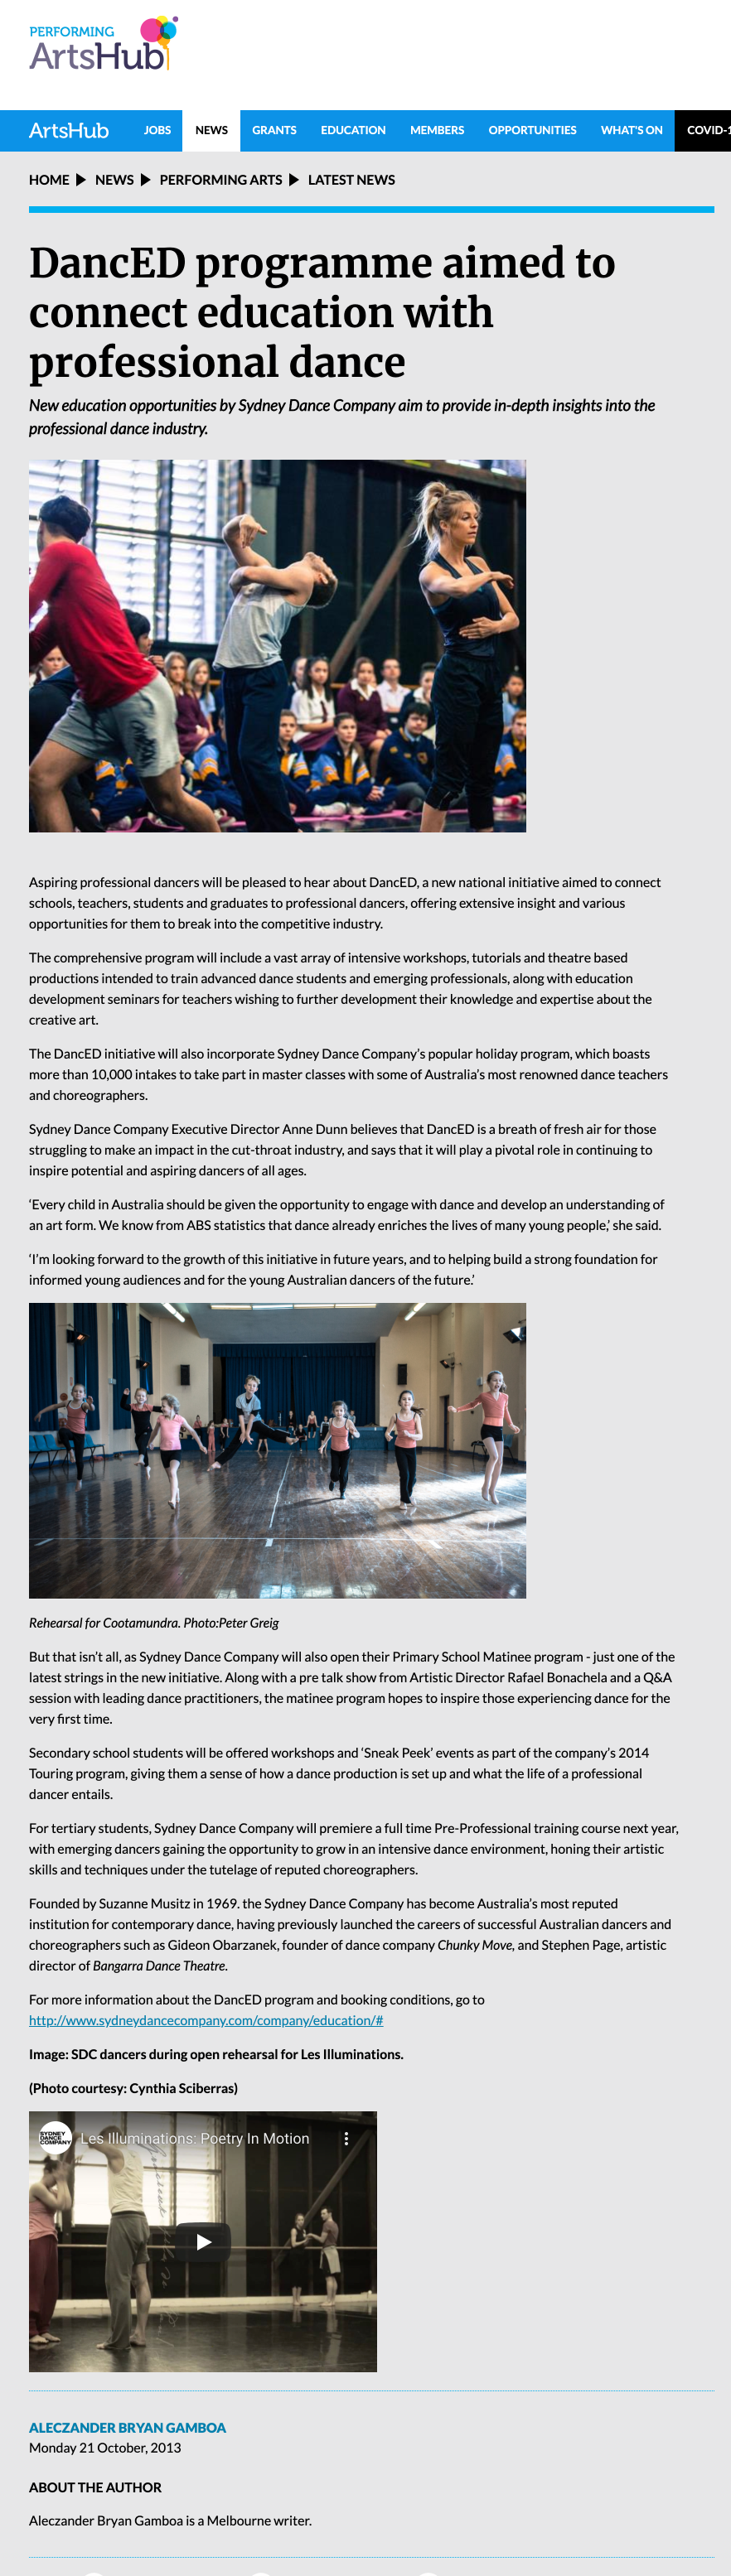 DancED programme aimed to connect education with professional dance.png